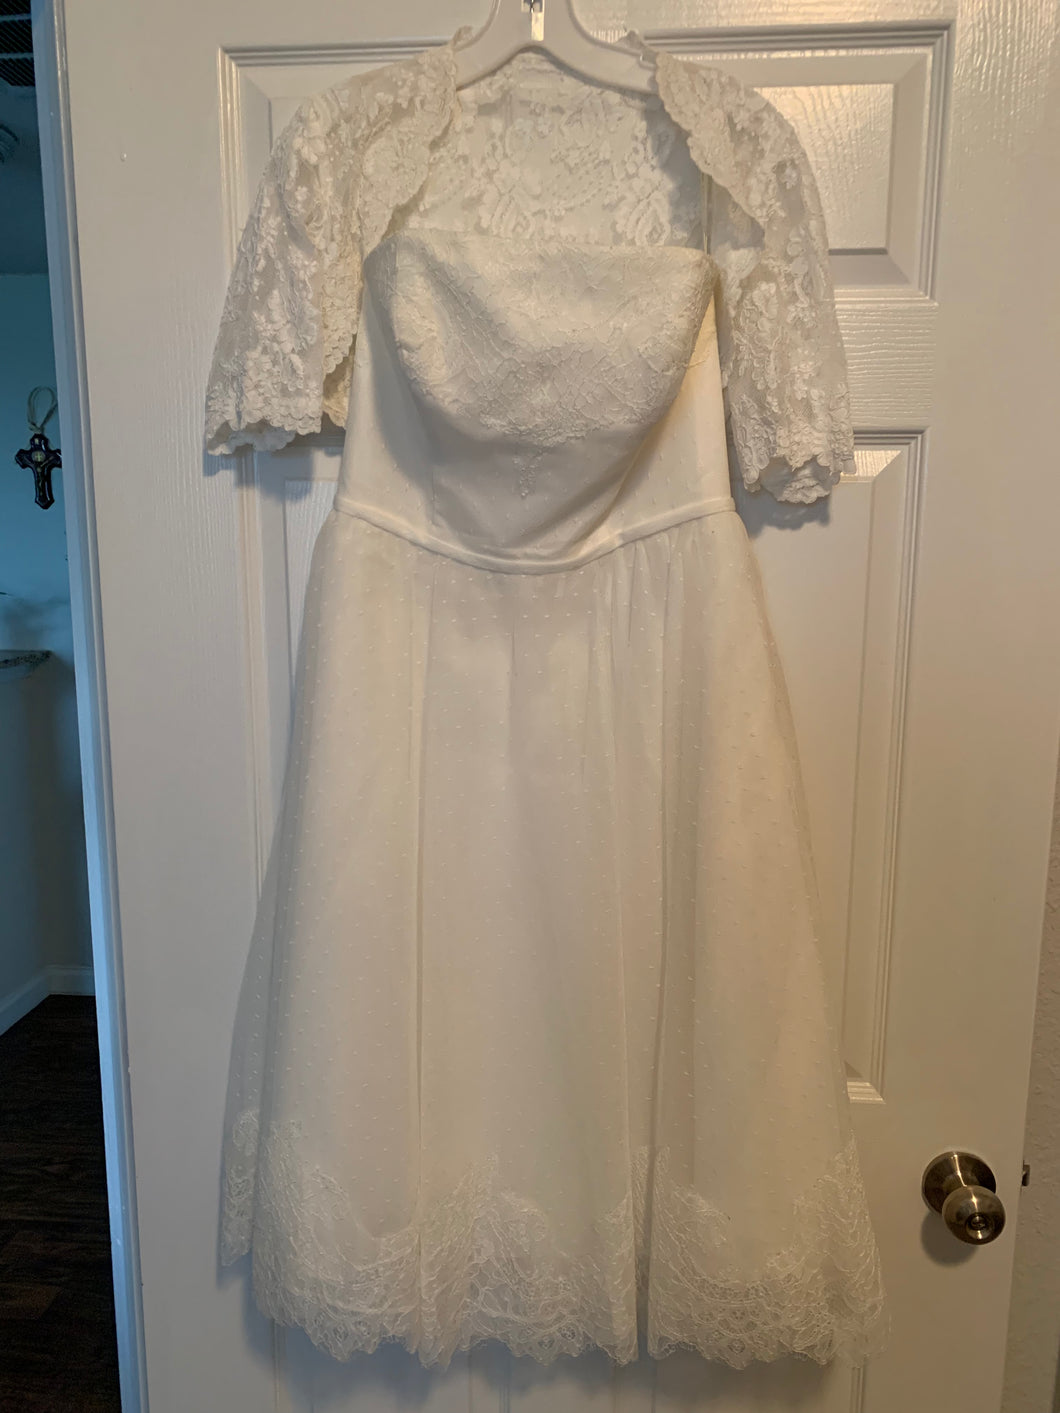 Galina 'WH3858' size 10 new wedding dress front view on hanger